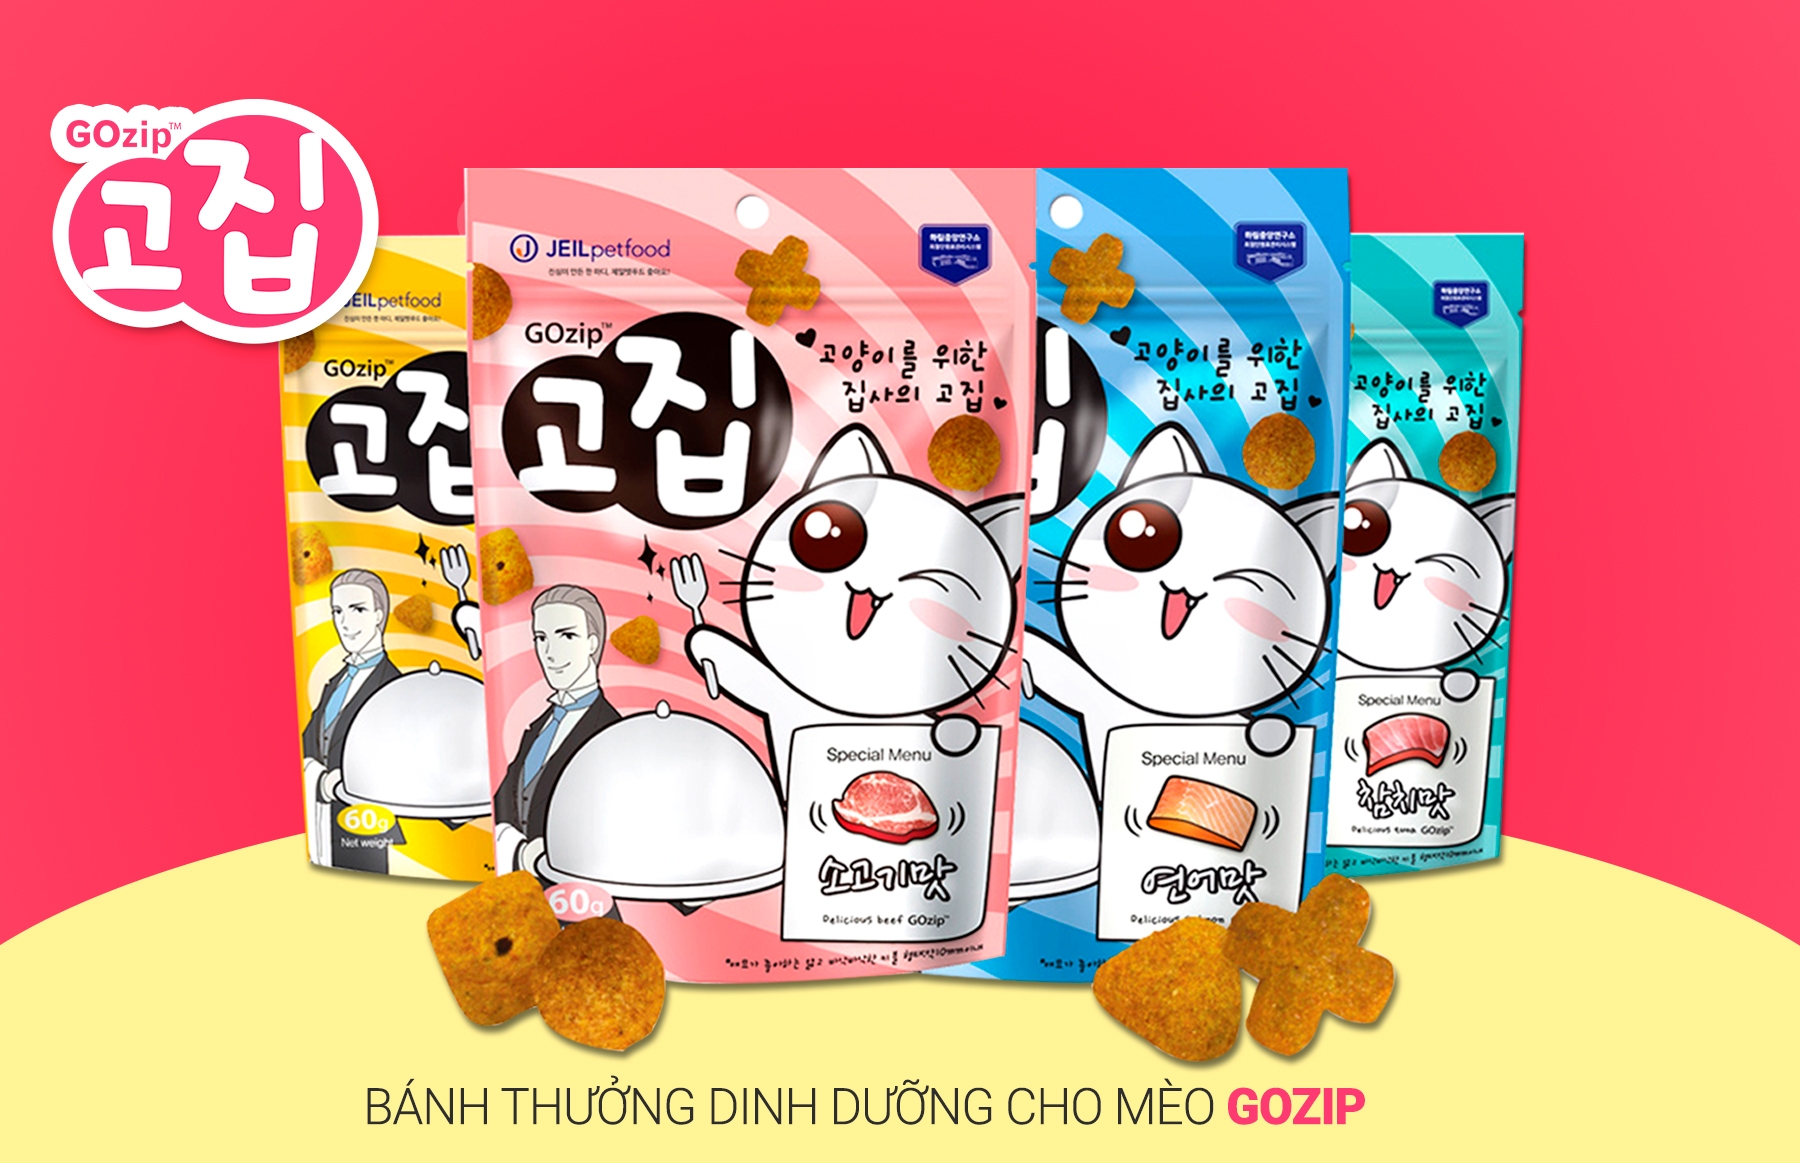 gozip-banh-thuong-dinh-duong